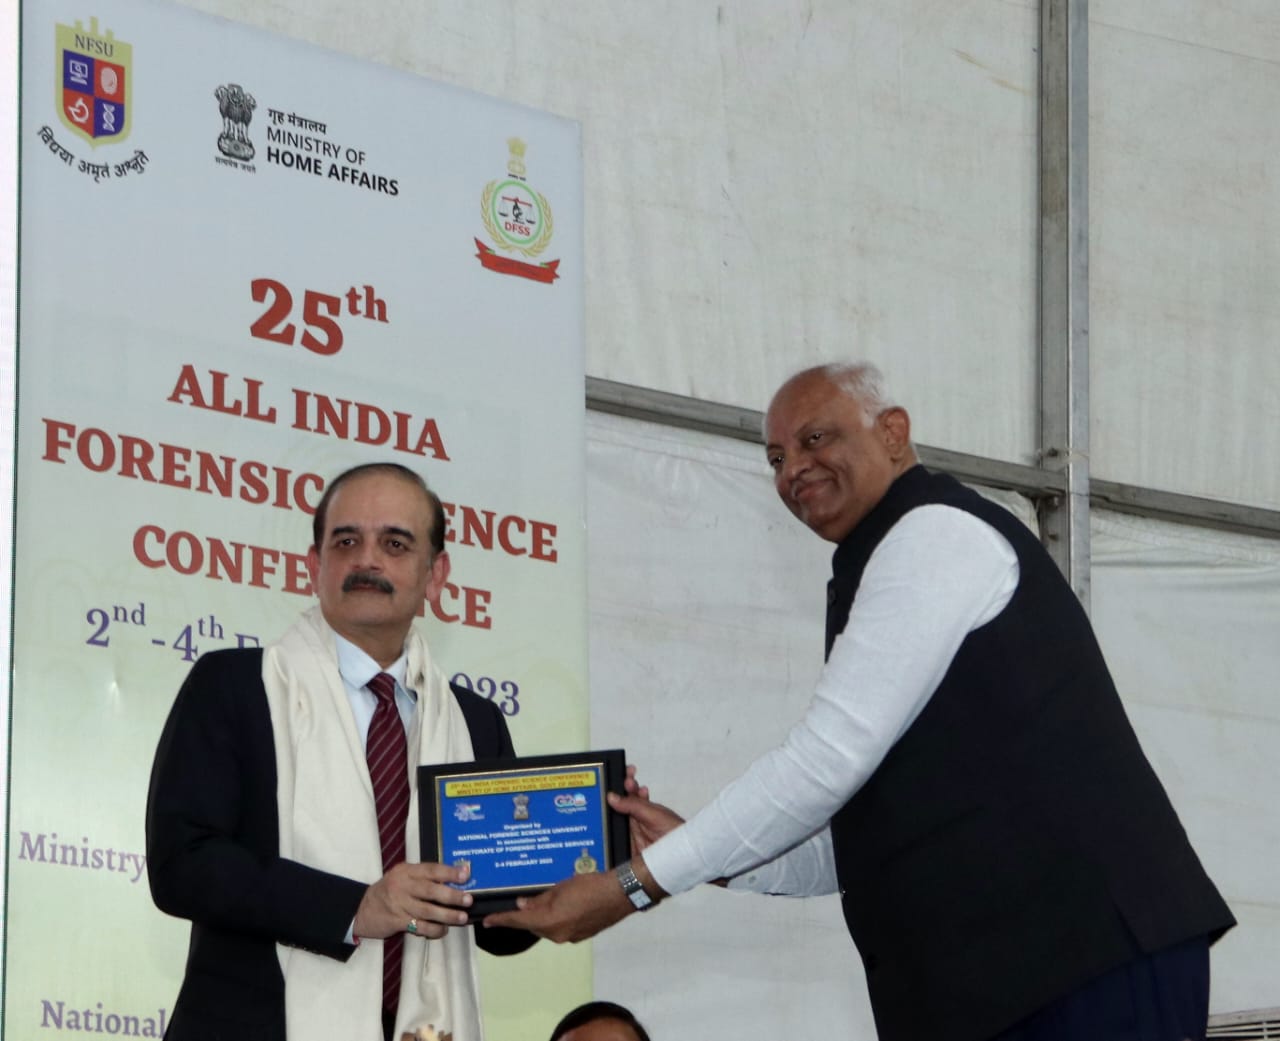 25th All India Forensic Science Conference